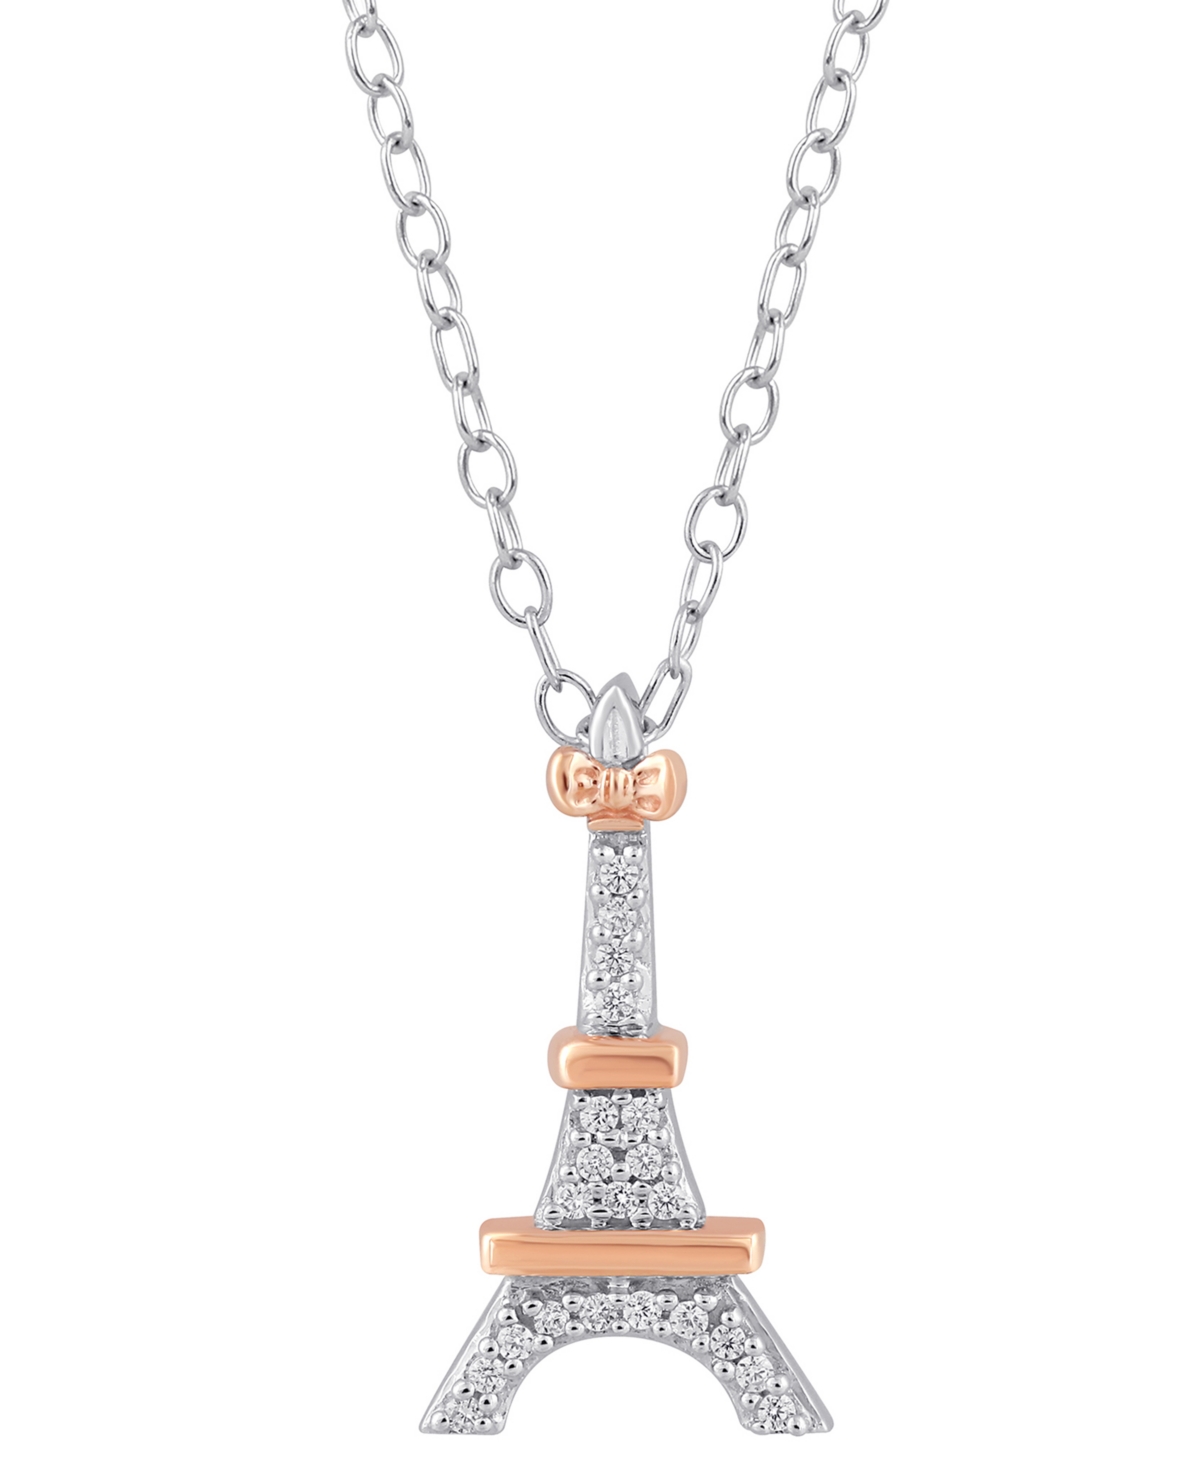 Diamond Accent Aristocats Eiffel Tower Pendant Necklace in Sterling Silver & 10k Rose Gold, 16" + 2" extender - Two-Tone